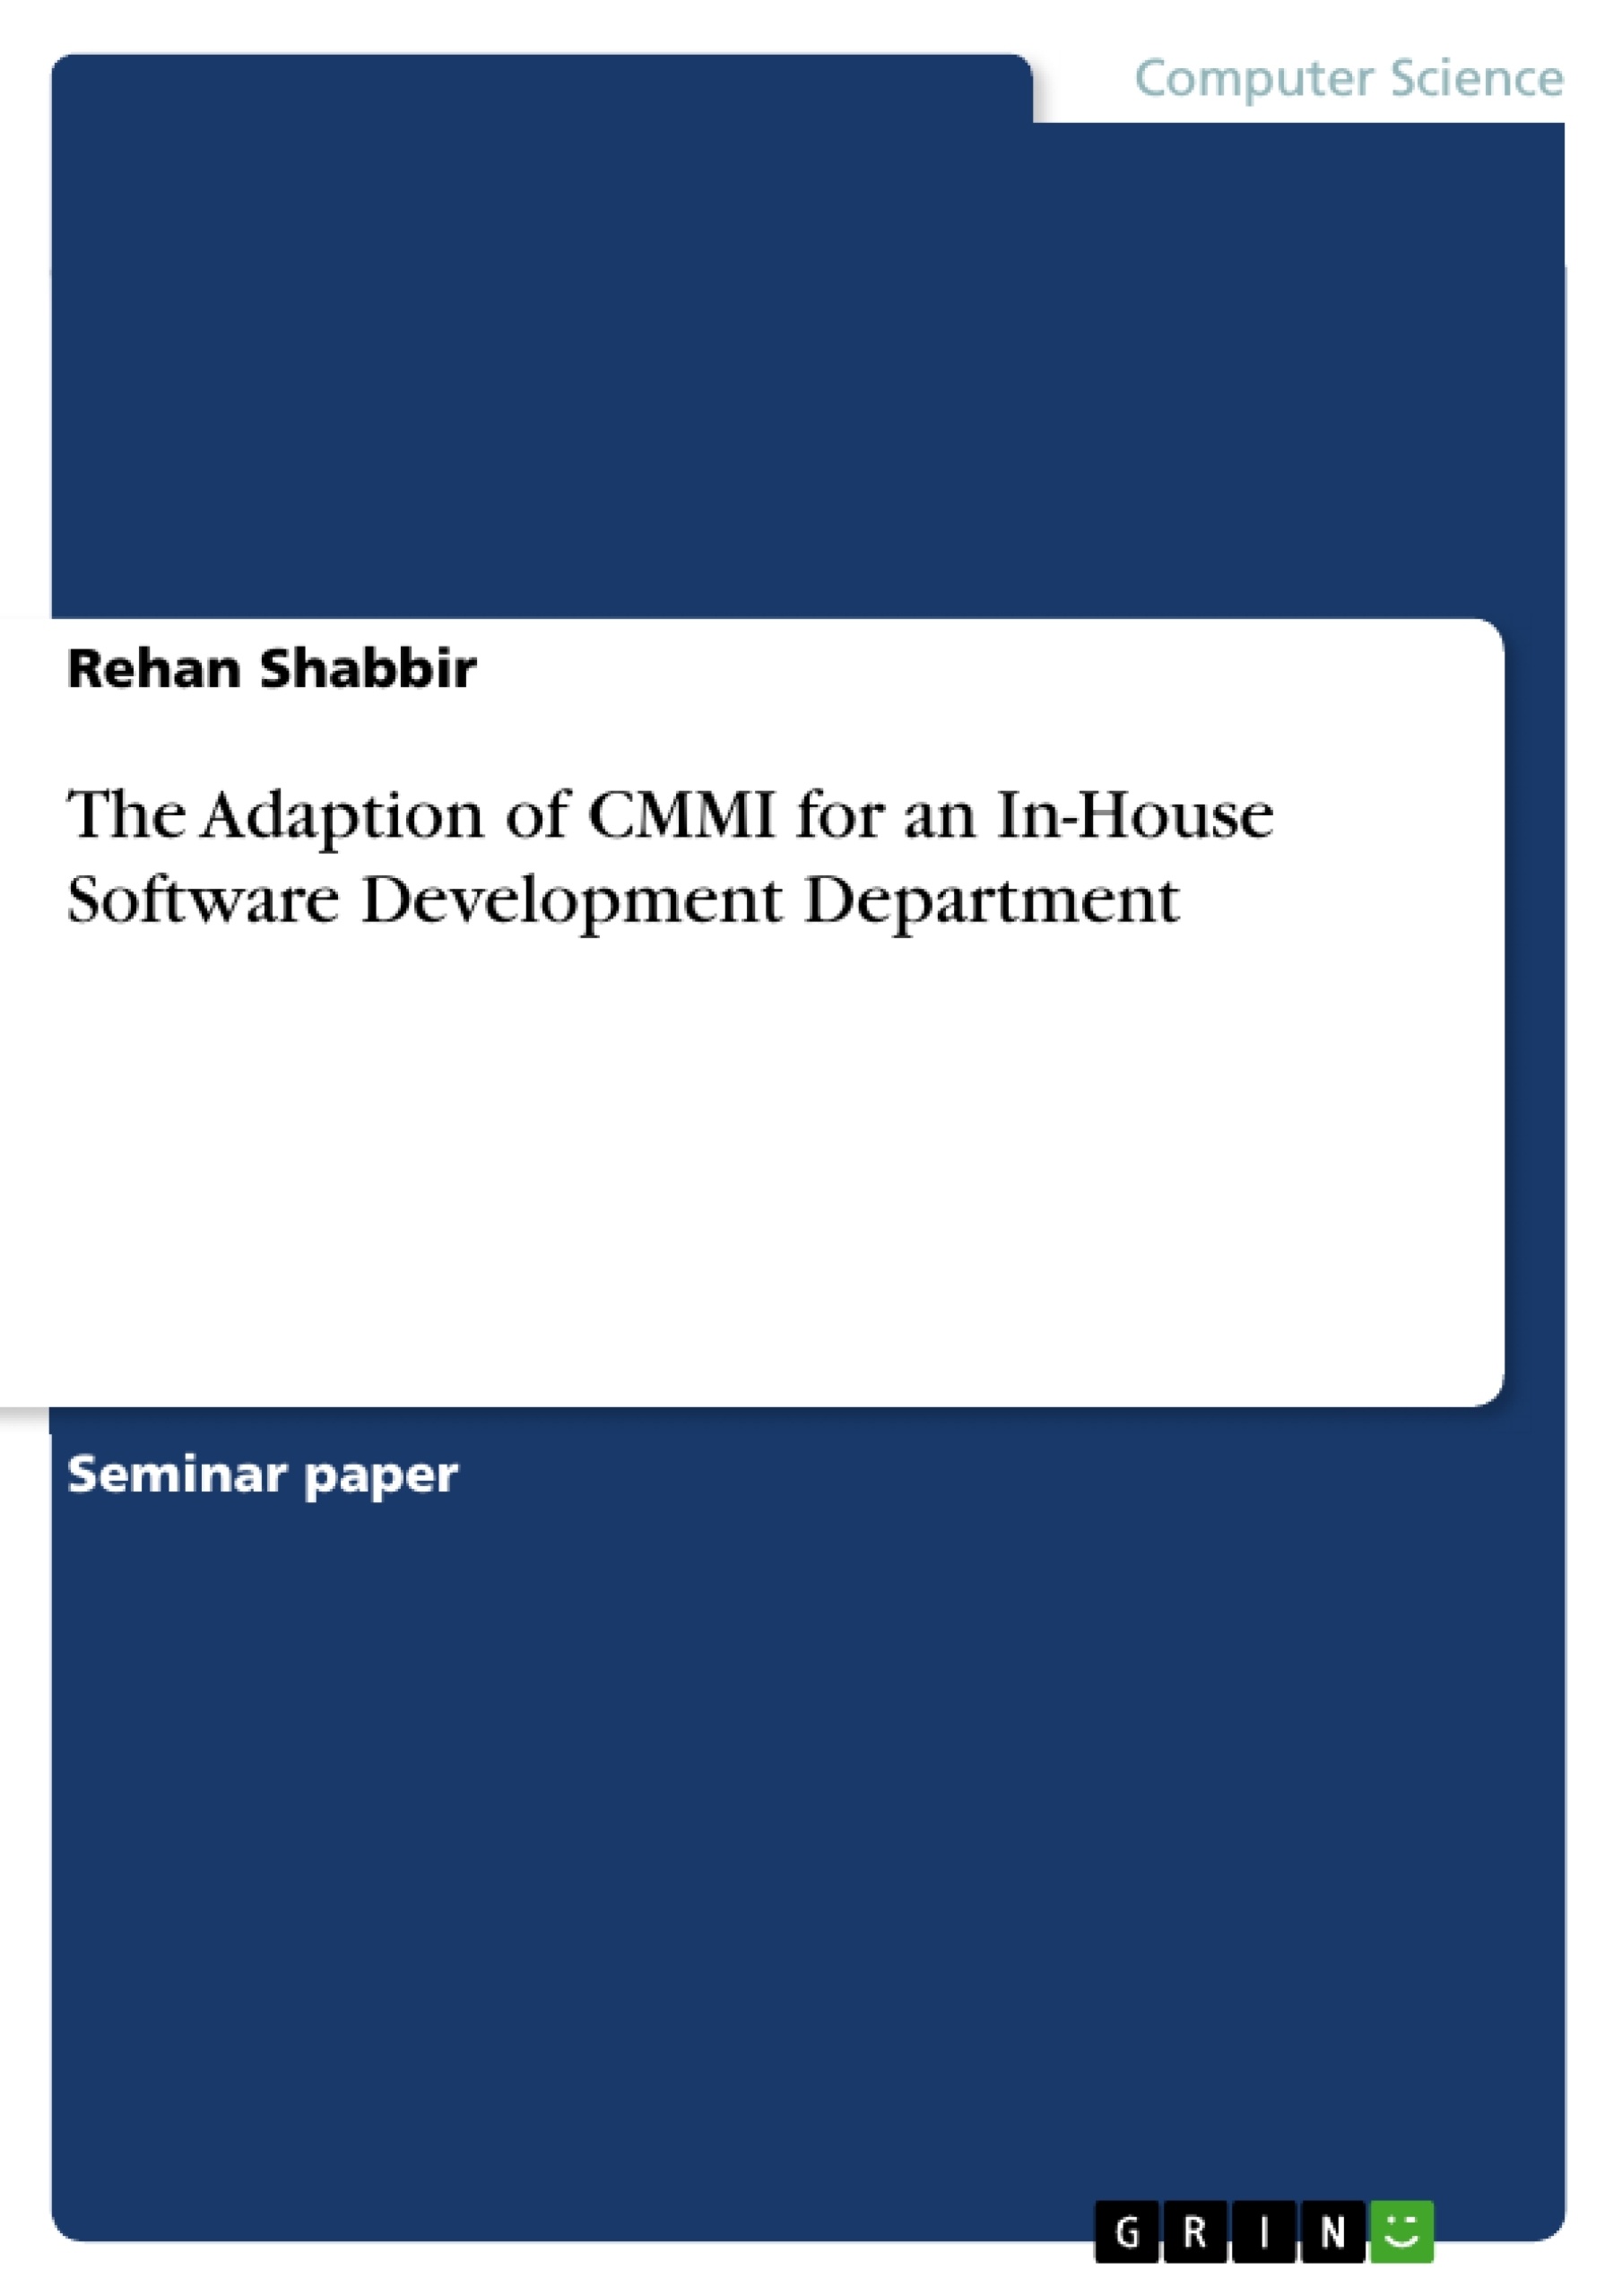 Titel: The Adaption of CMMI for an In-House Software Development Department